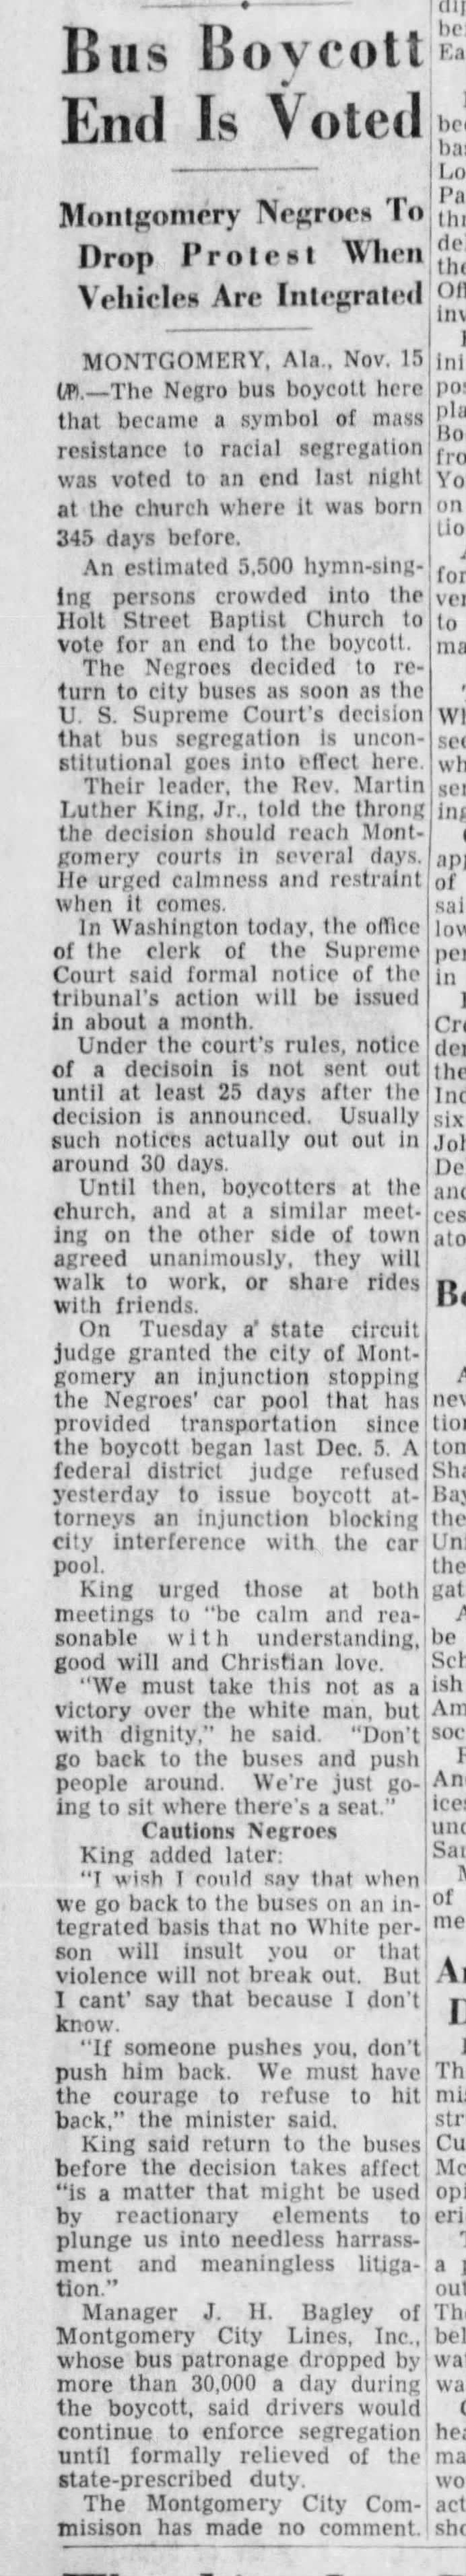 Montgomery Bus Boycott comes to an end, 1956